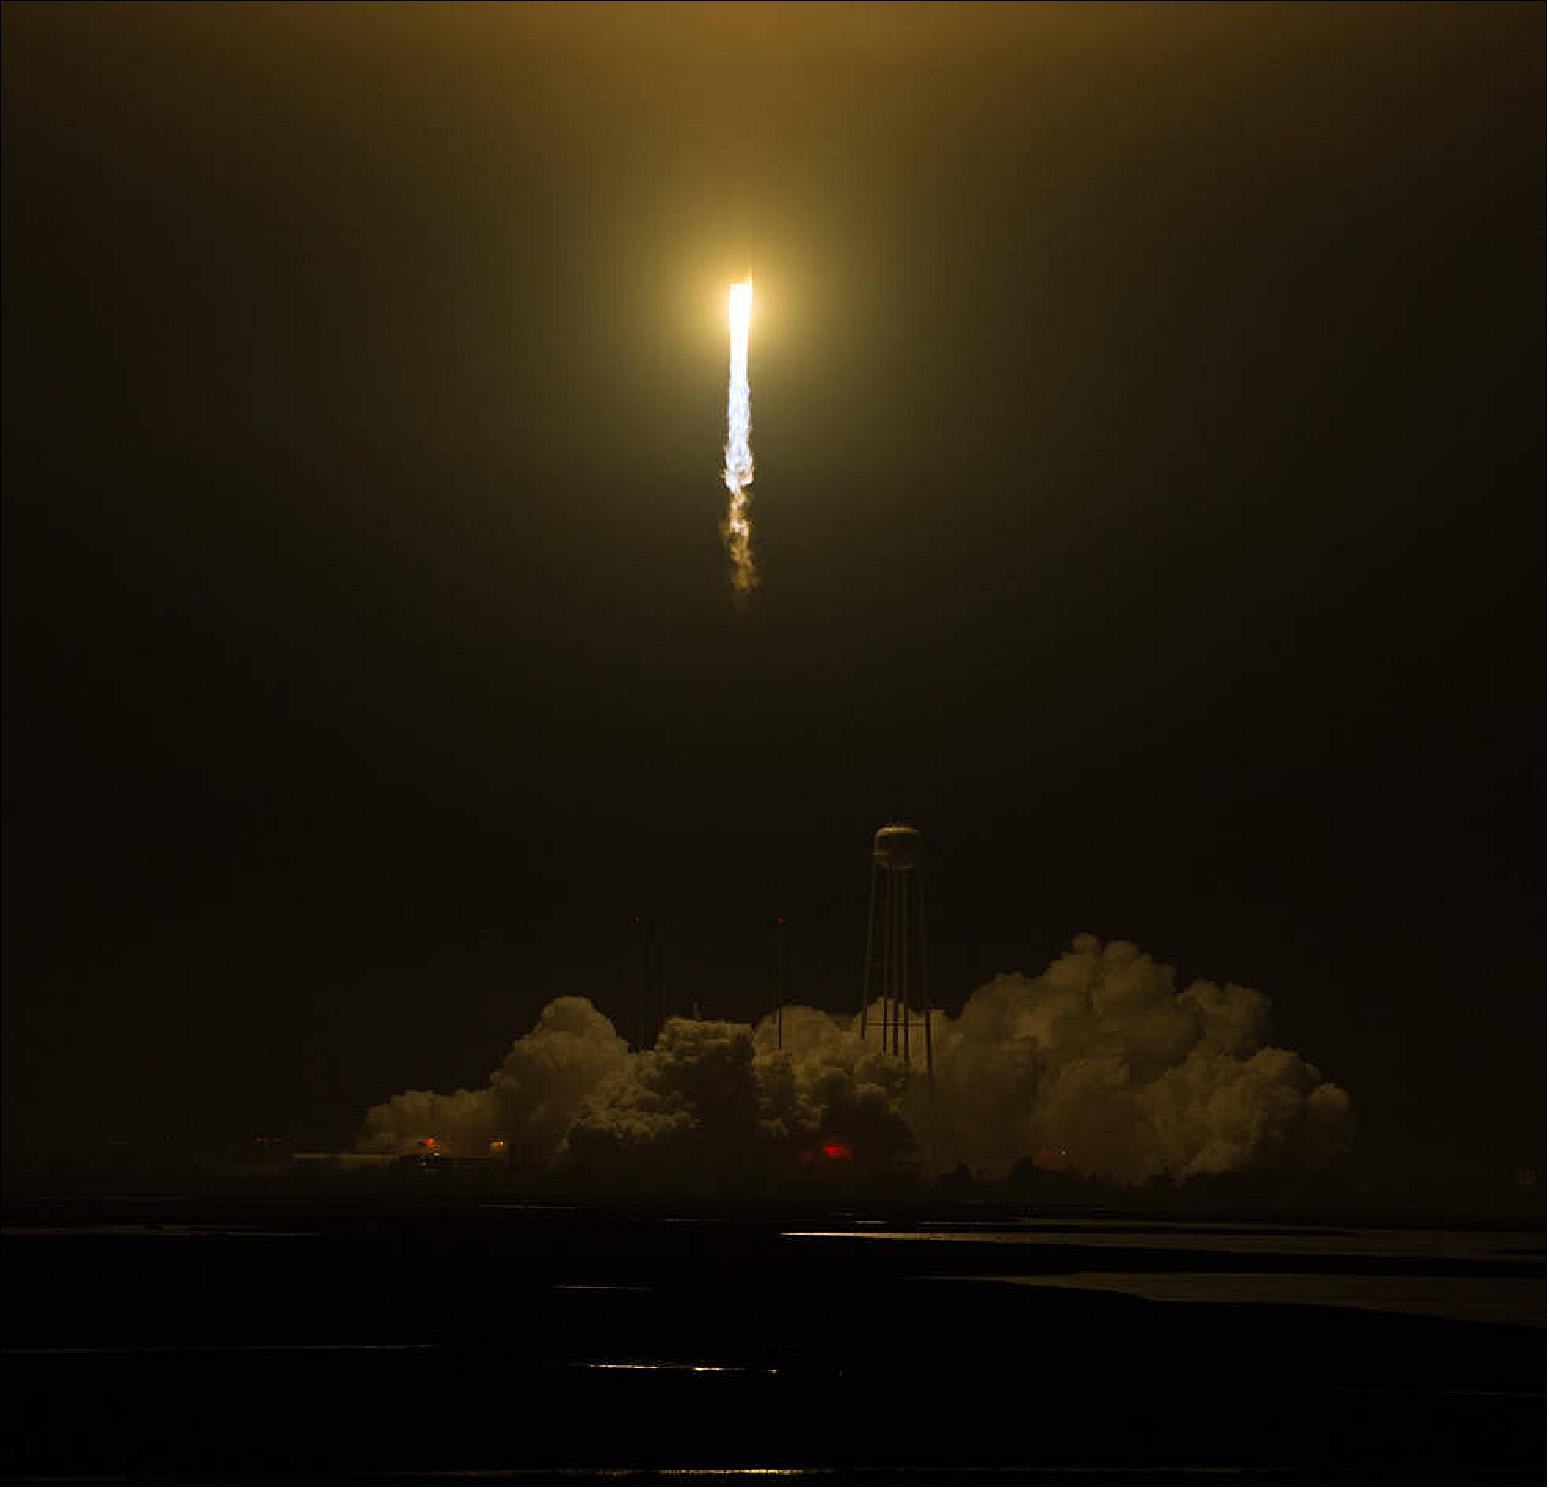 Figure 8: The Orbital ATK Antares rocket, with the Cygnus spacecraft onboard, launched from Pad-0A, Monday, May 21, 2018 at NASA's Wallops Flight Facility in Virginia. Orbital ATK’s ninth contracted cargo resupply mission with NASA to the International Space Station will deliver approximately 3352 kg of science and research, crew supplies and vehicle hardware to the orbital laboratory and its crew (image credit:NASA/Aubrey Gemignani)